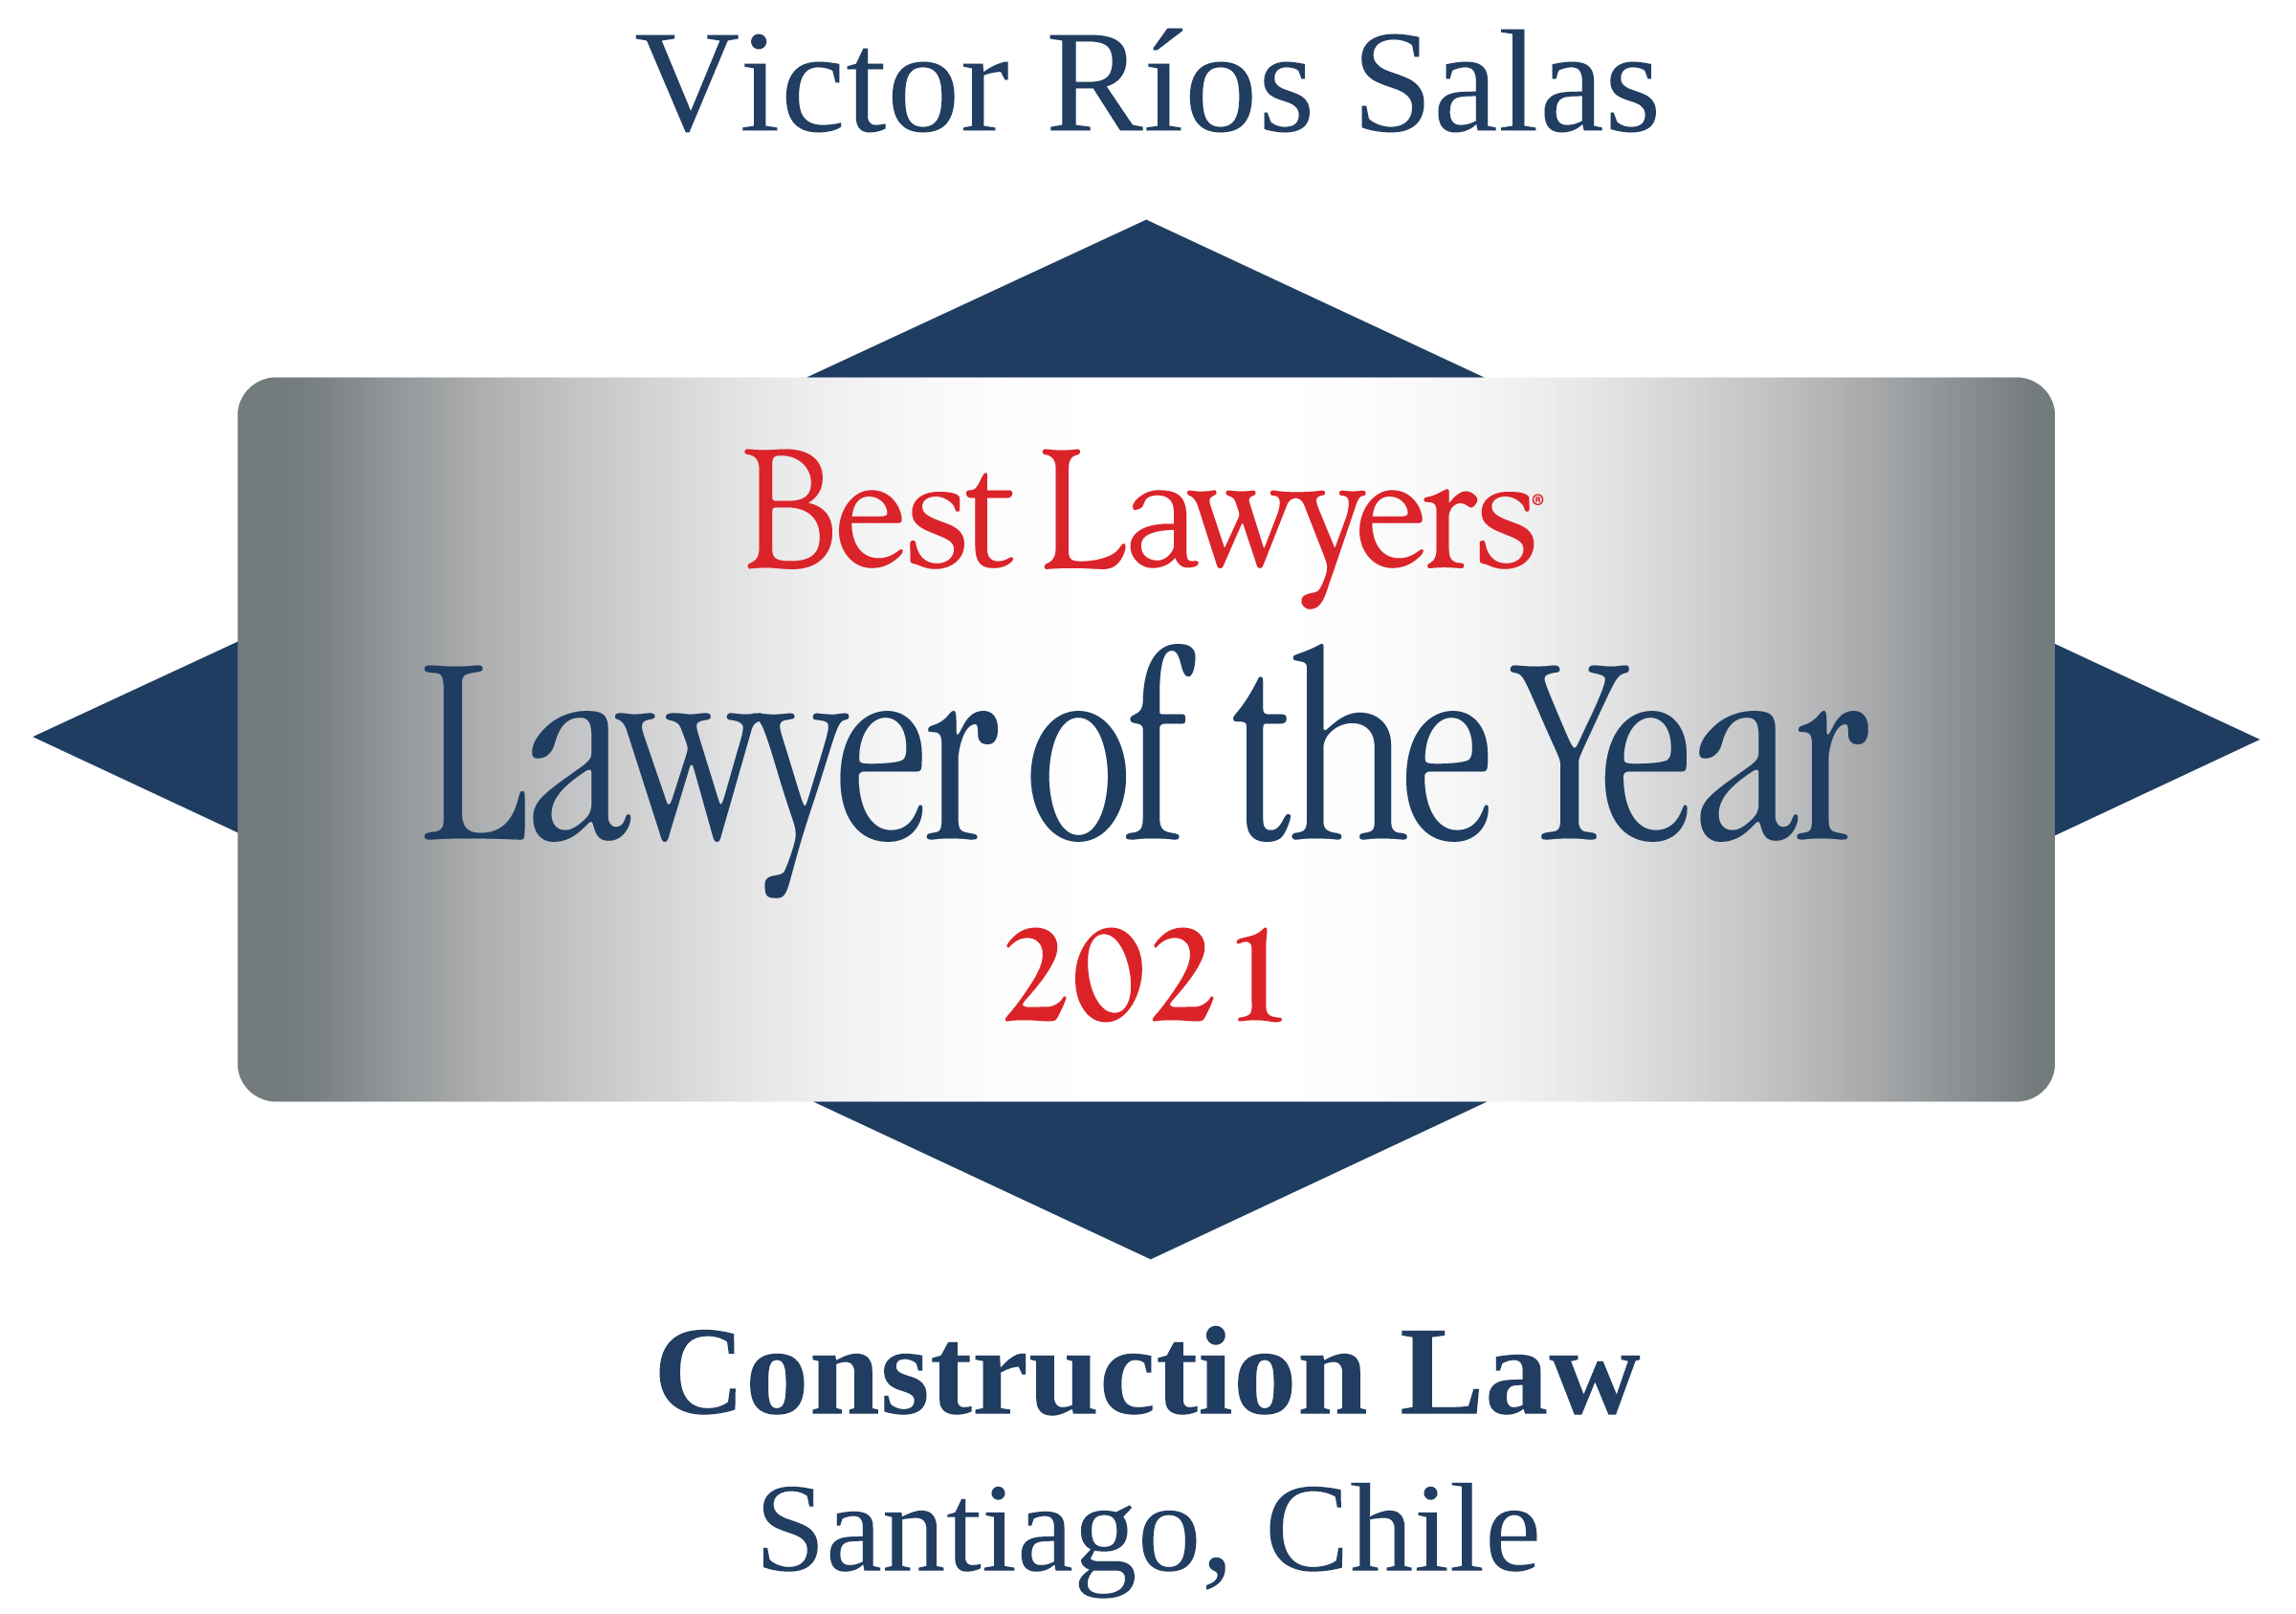 Best Lawyers - _Lawyer of the Year_ Traditional Logo